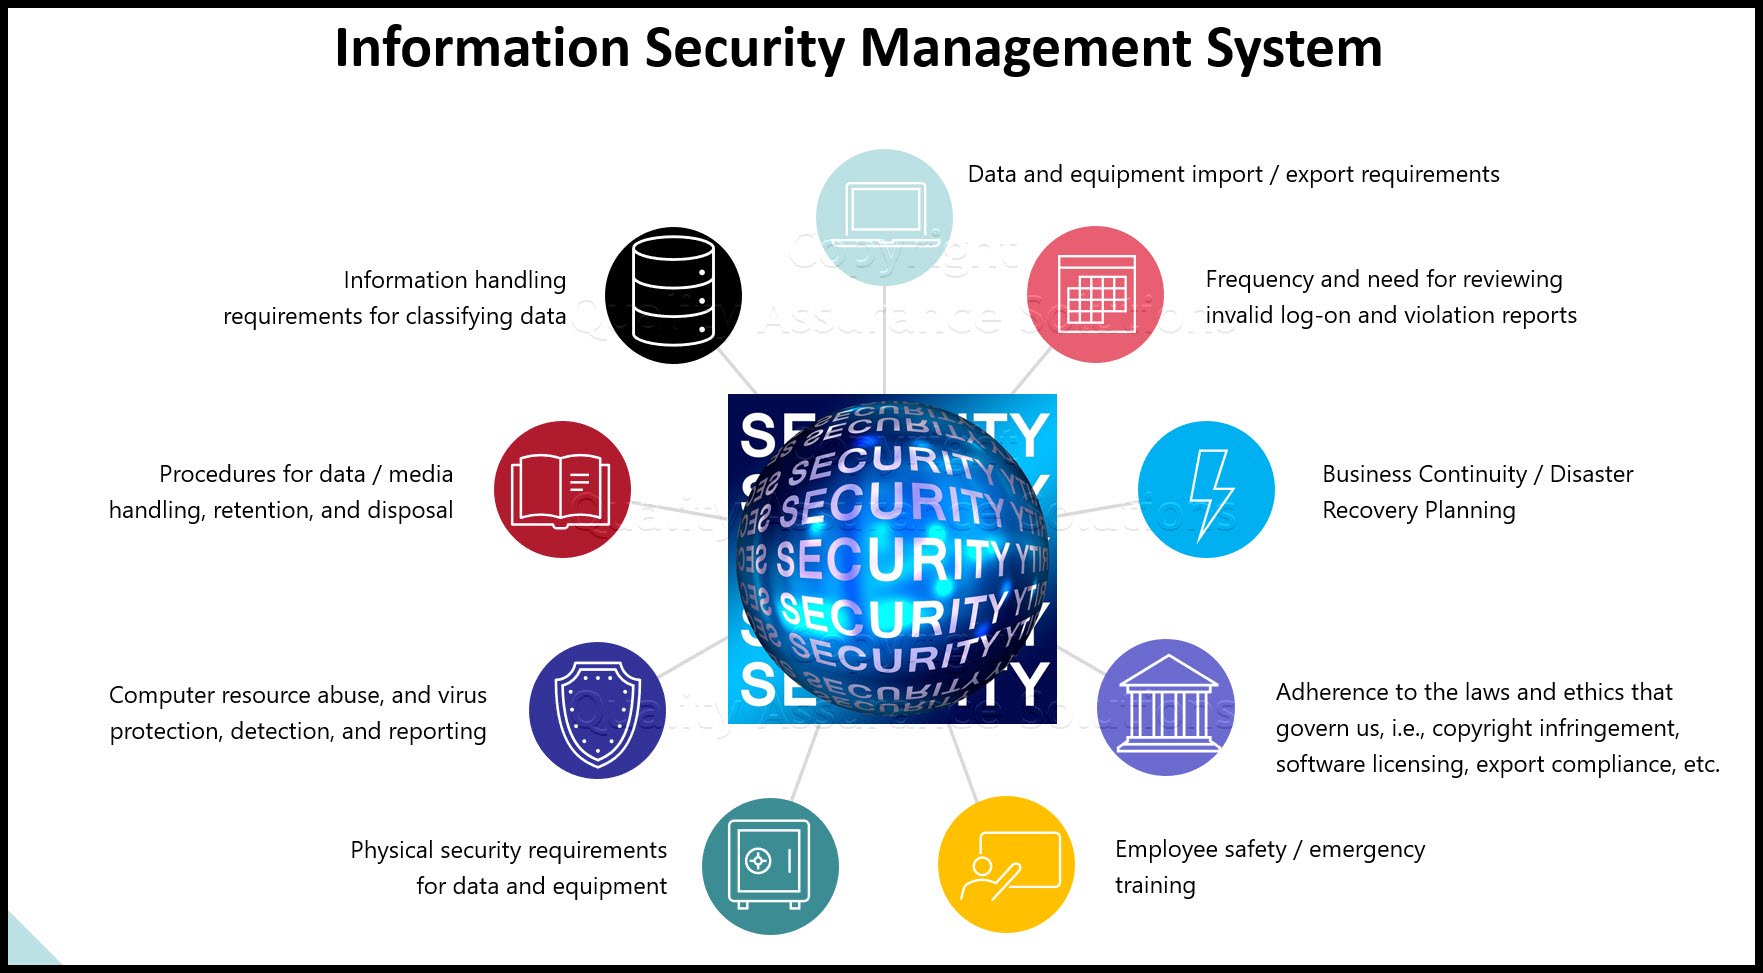 This article covers the basics, awareness, and key content for your company's information security management system